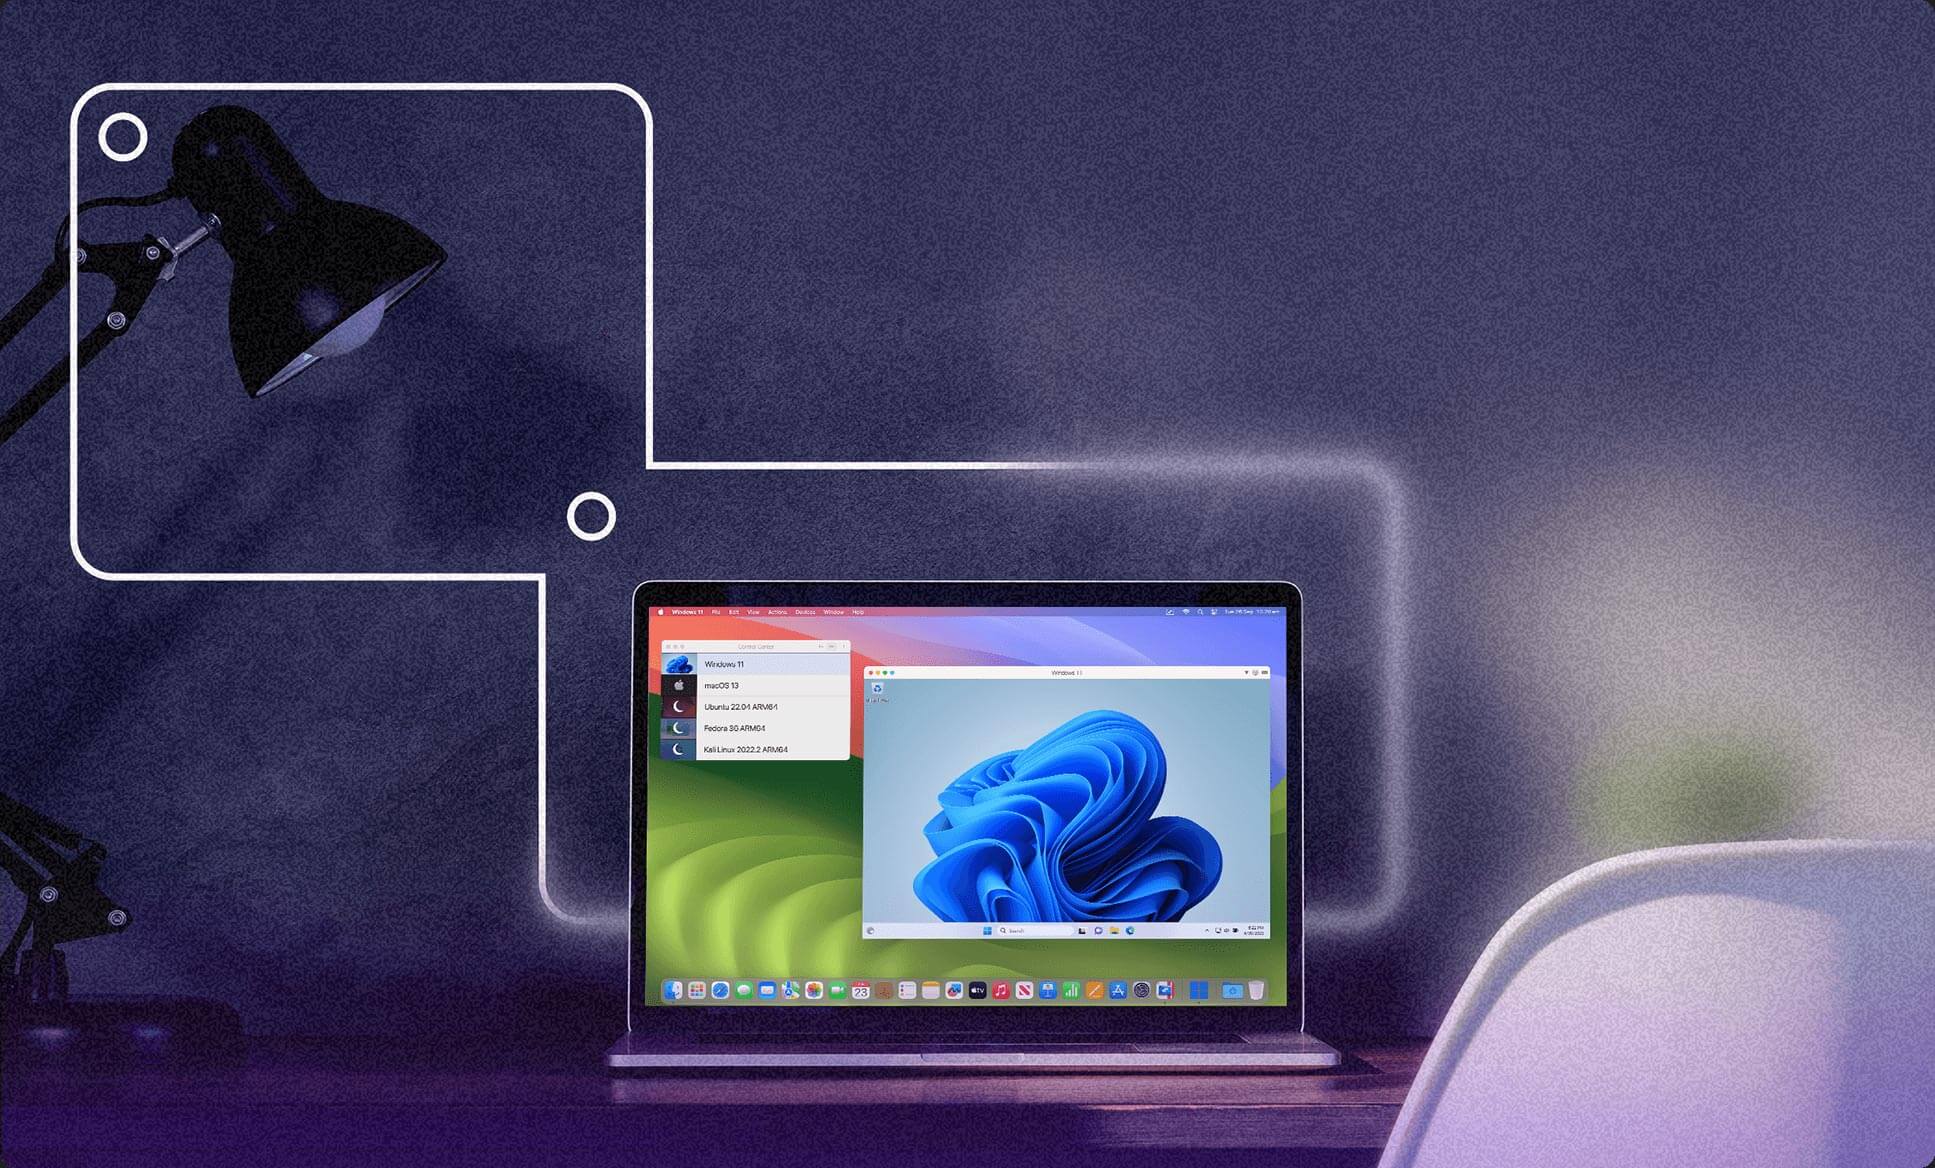 Deliver the most seamless solution for running Windows on a Mac